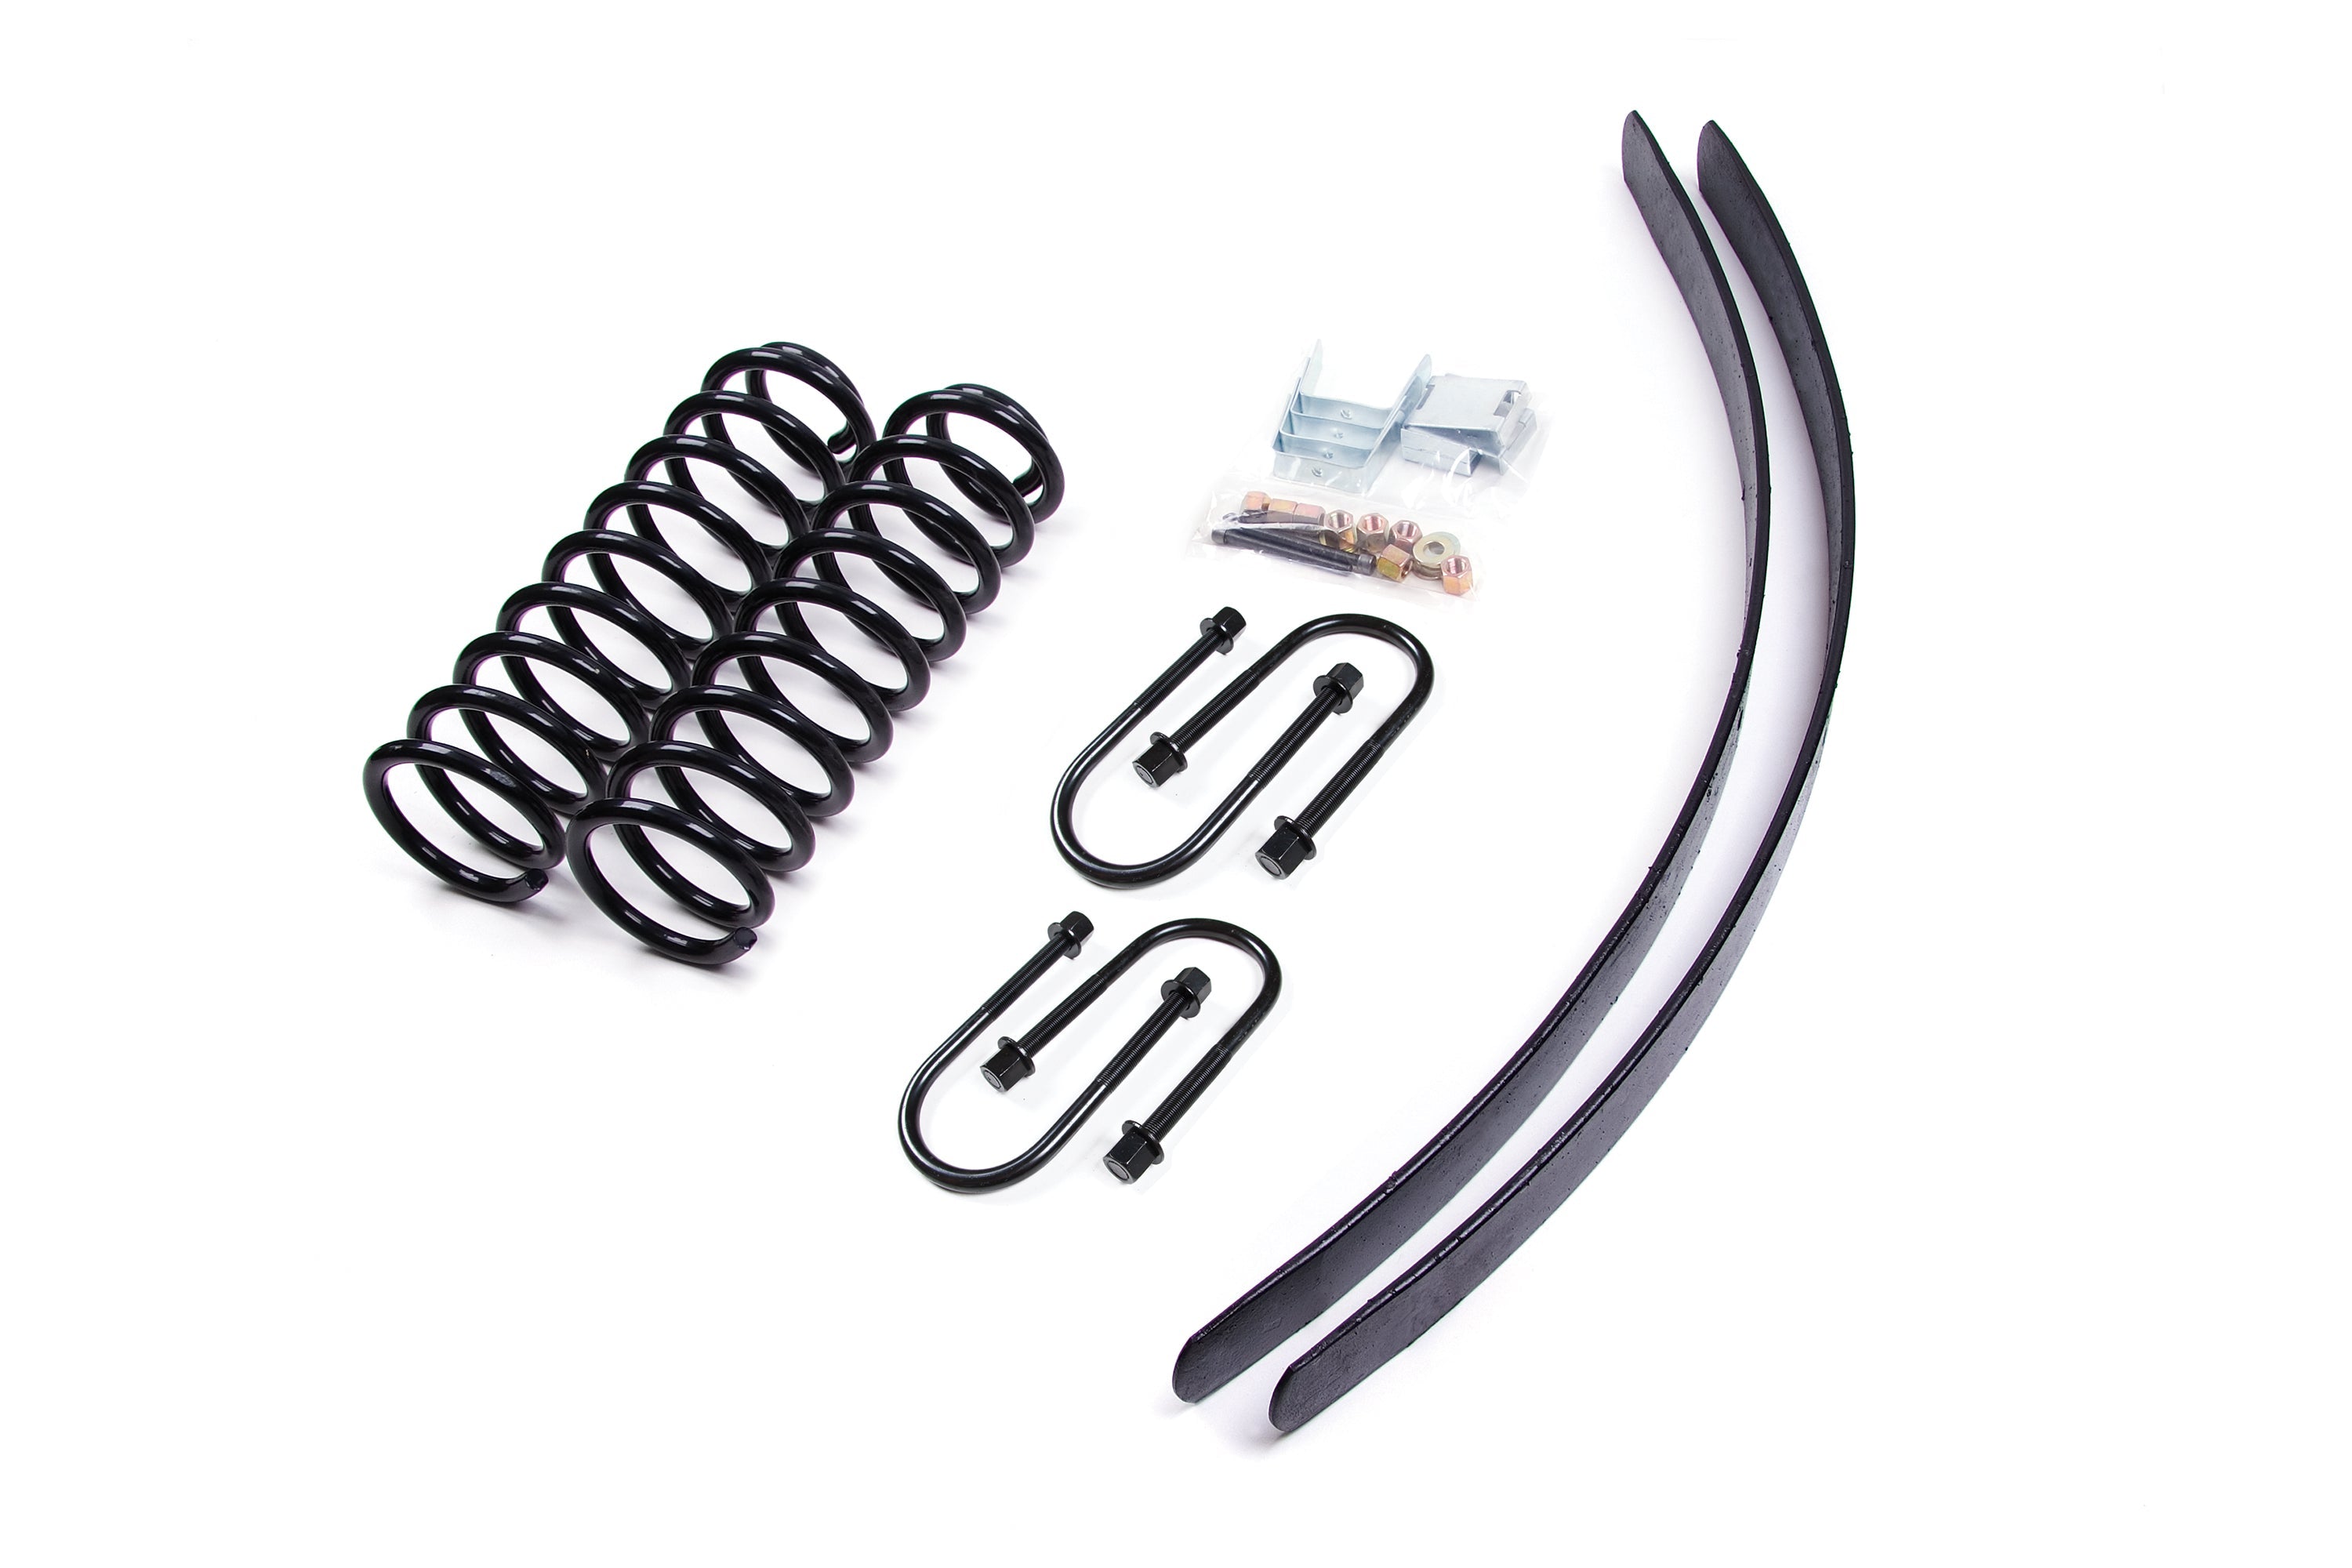 Zone Offroad Products ZONJ6 Zone 3 Coil Spring Lift Kit